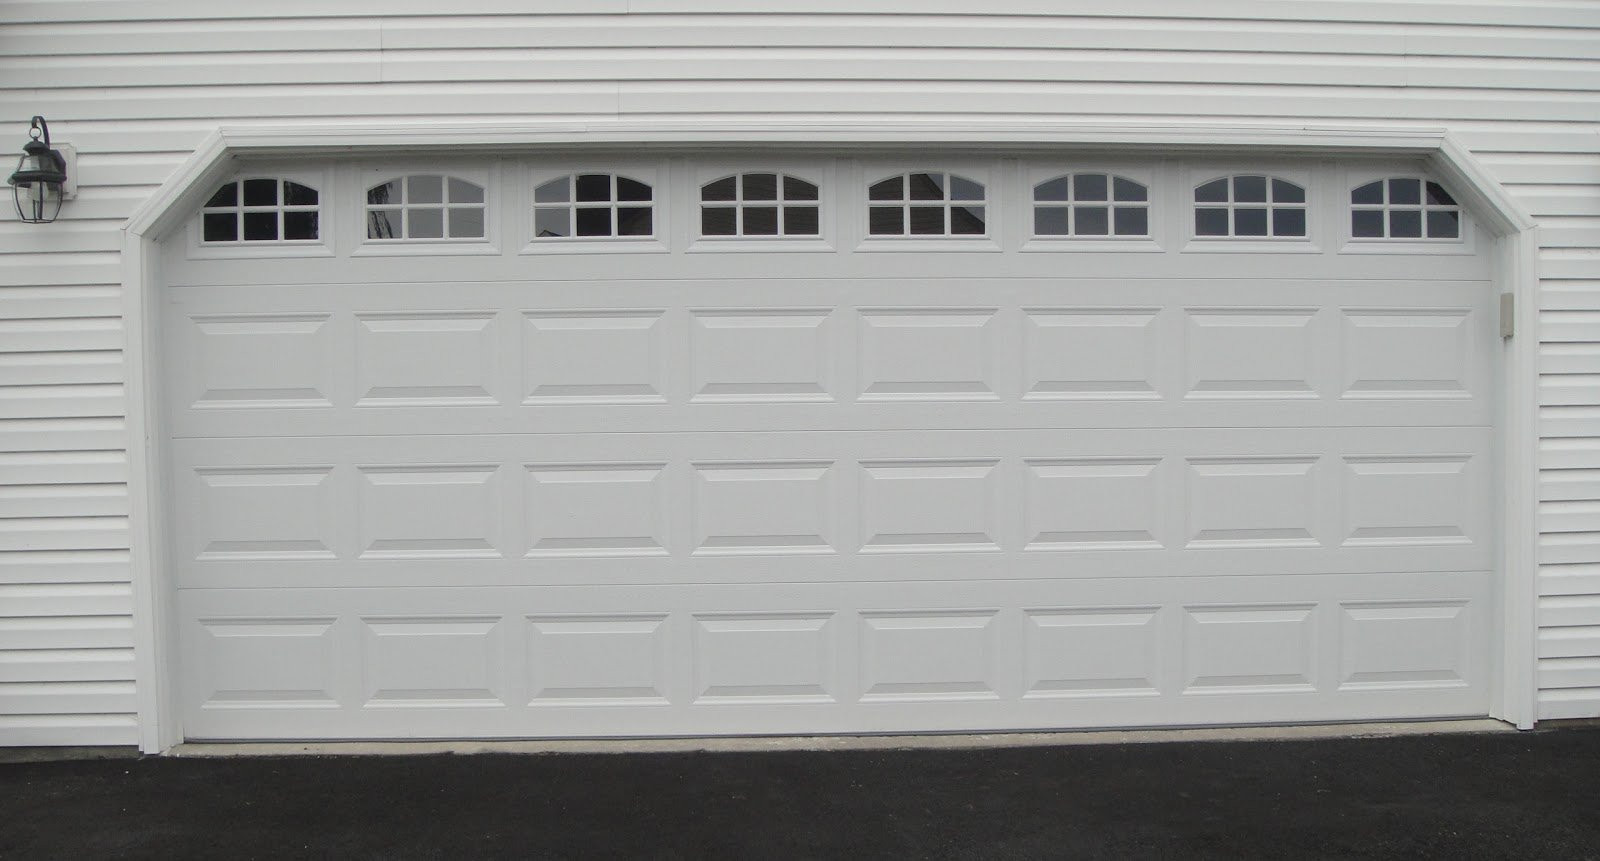 Creative Garage Door Installation At Lowes with Simple Design